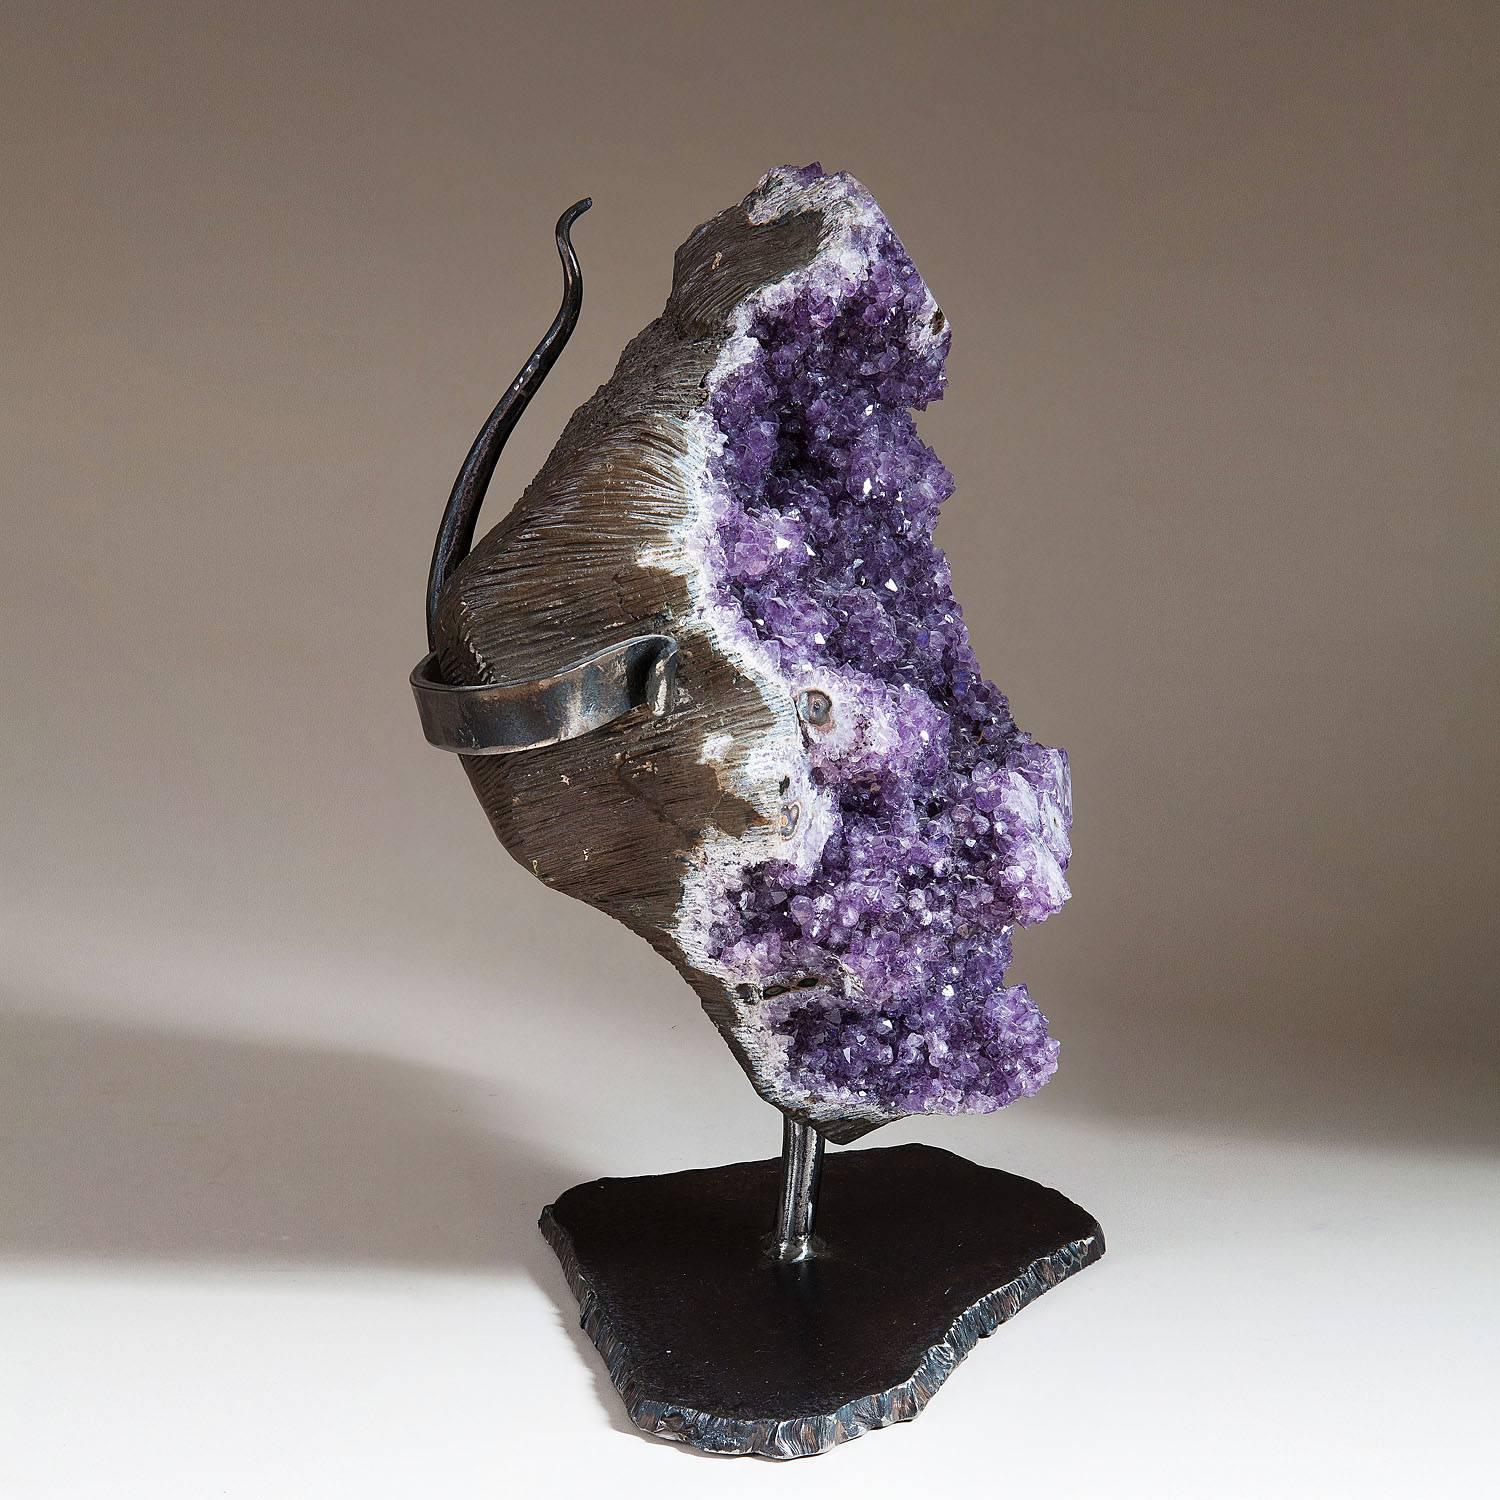 Brazil.

A substantial specimen of Brazilian amethyst mounted on a wrought iron base

including stand.
Measures: H 49.5cm. 
W 38cm.
D 24 cm.